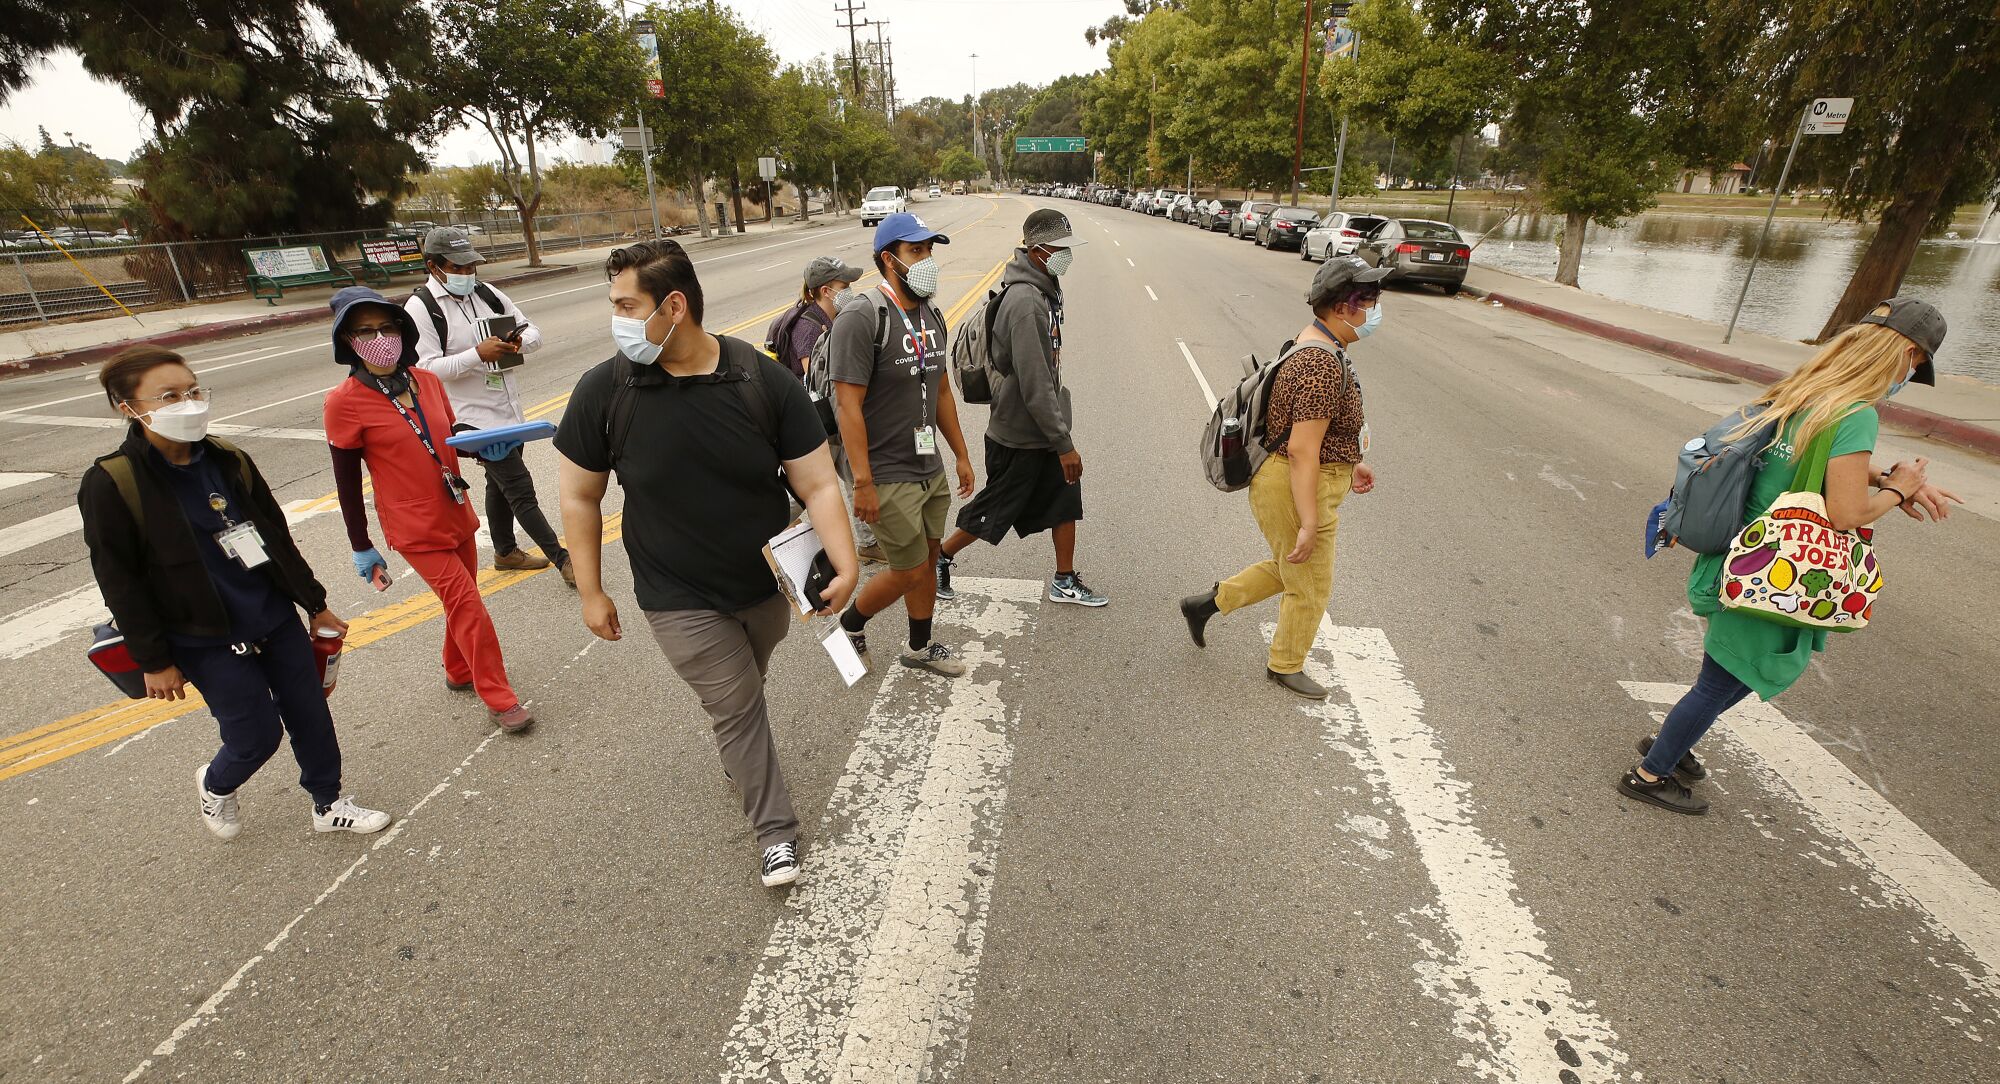 A group of people cross a street in Lincoln Park.